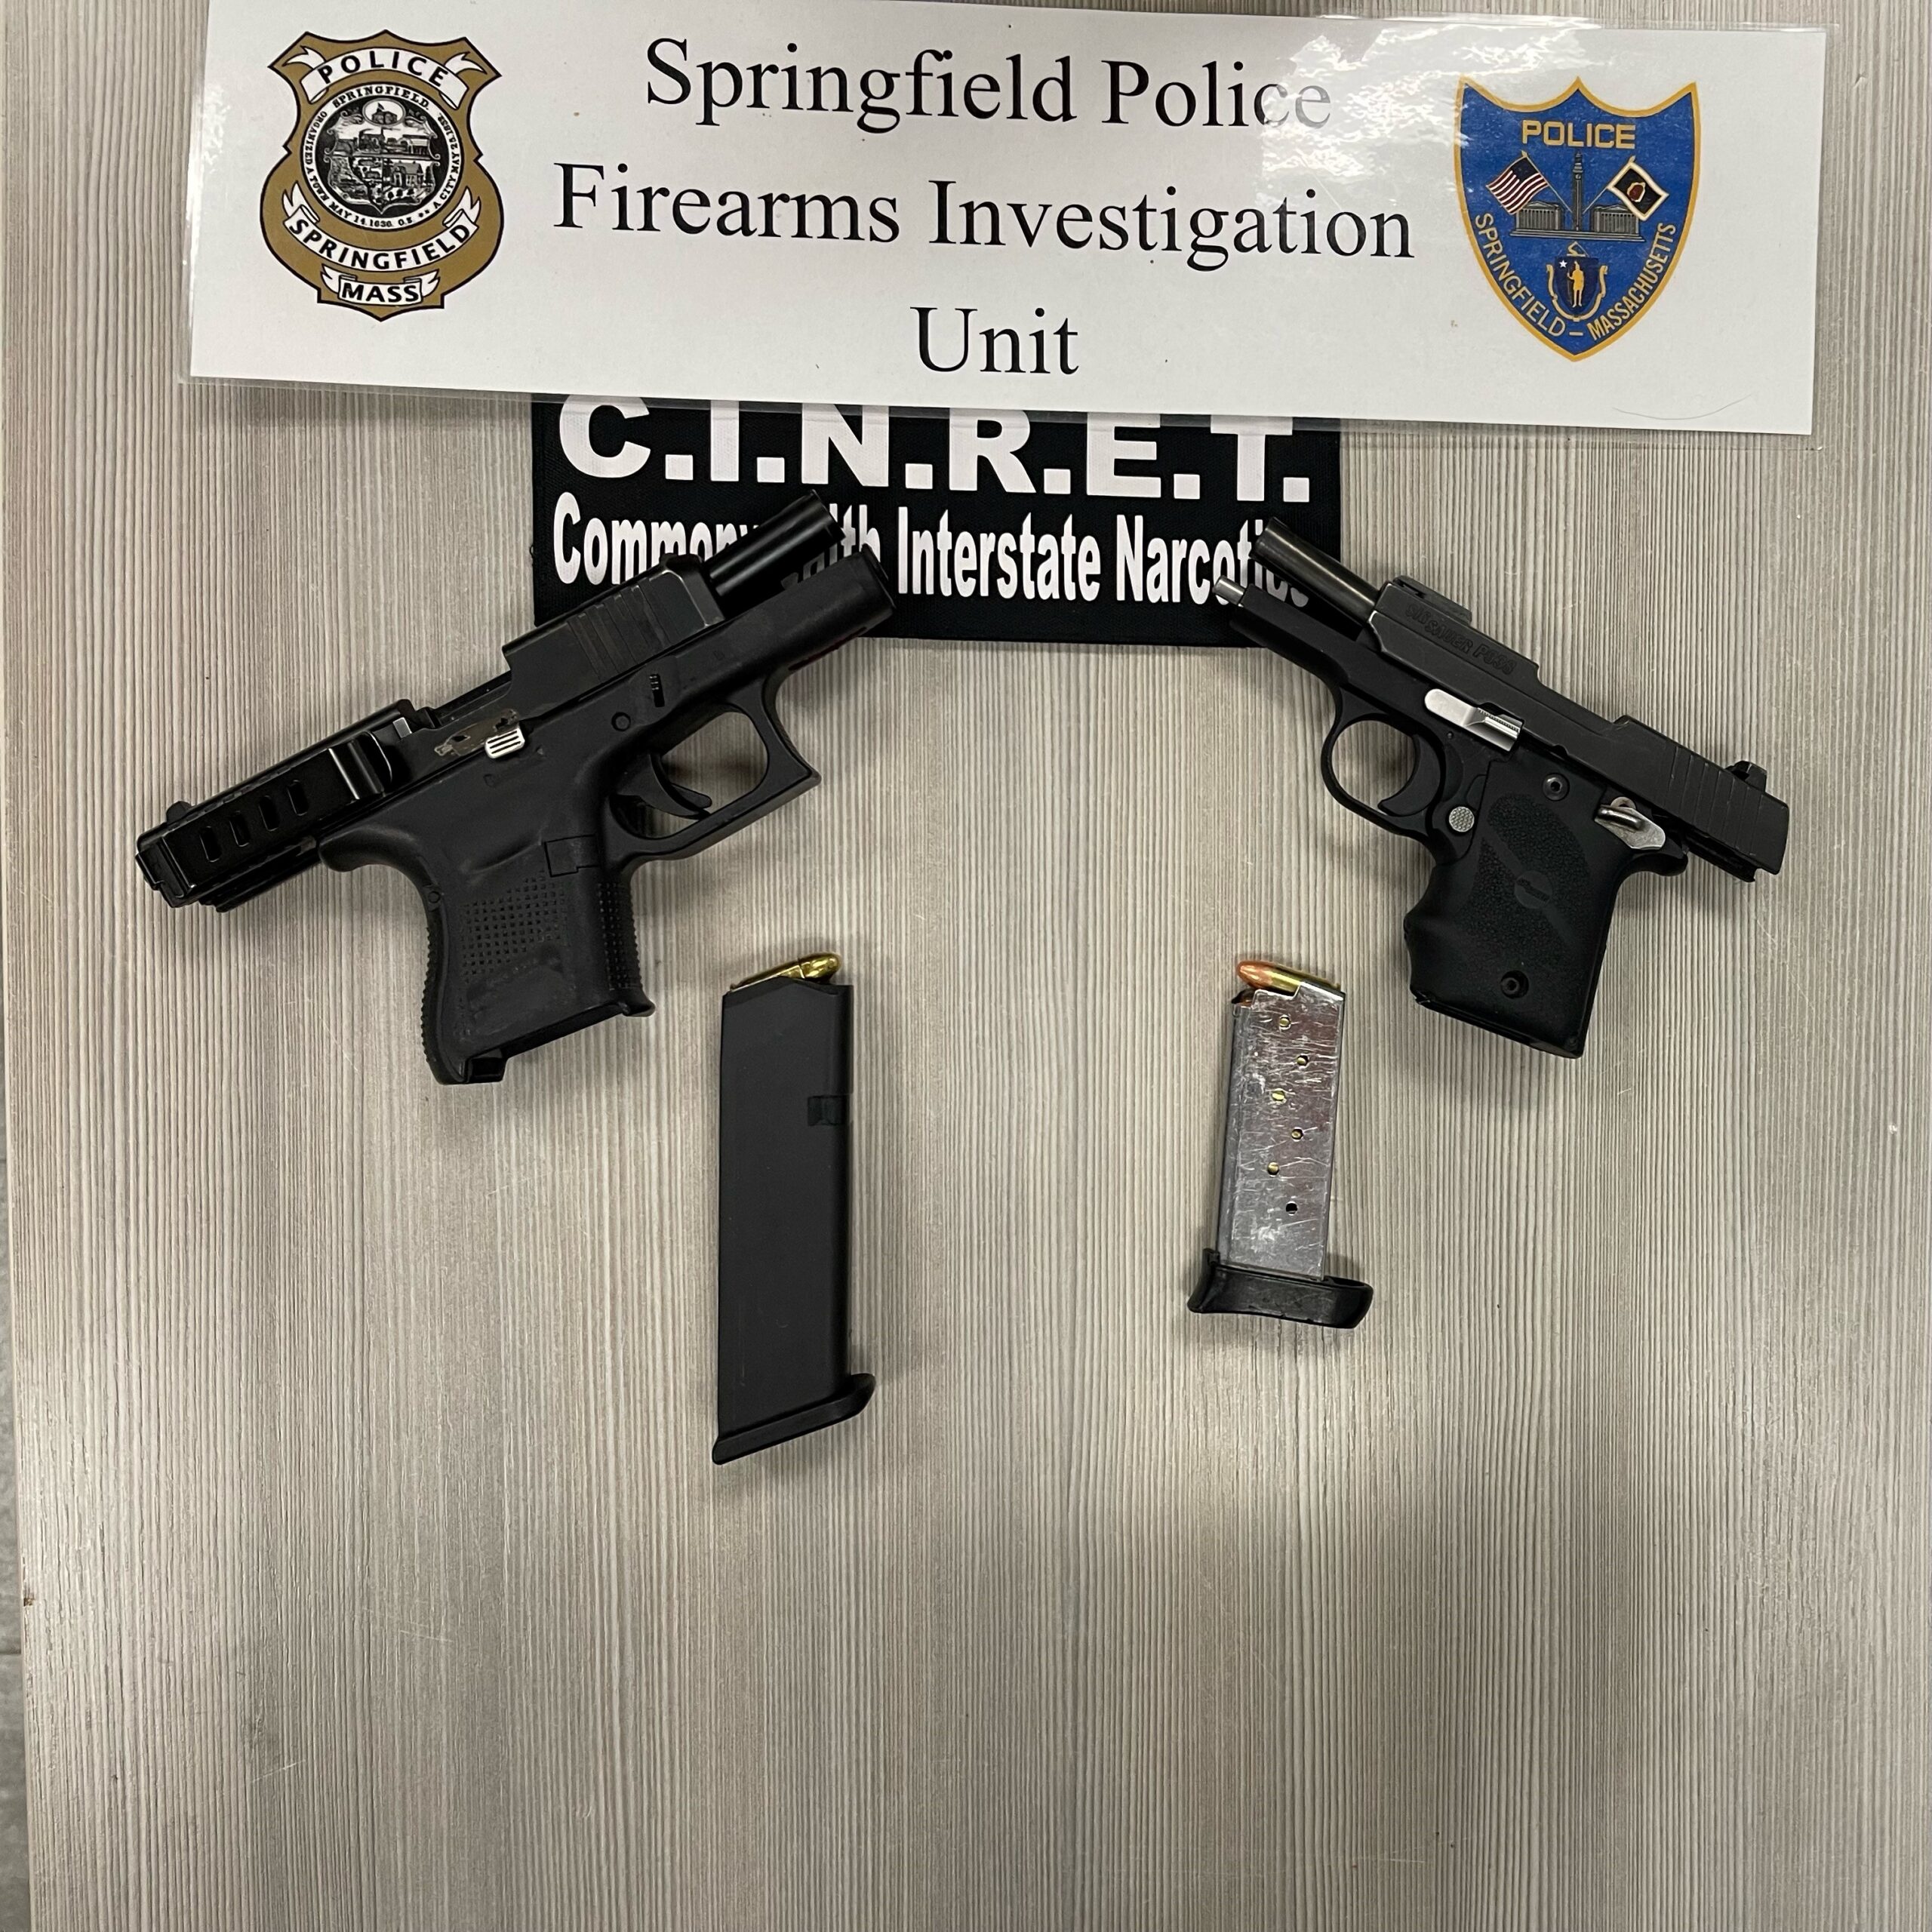 SPD FIU Detectives Seize 31st Illegal Firearm on 35th Day of 2023 –  Springfield Police Department